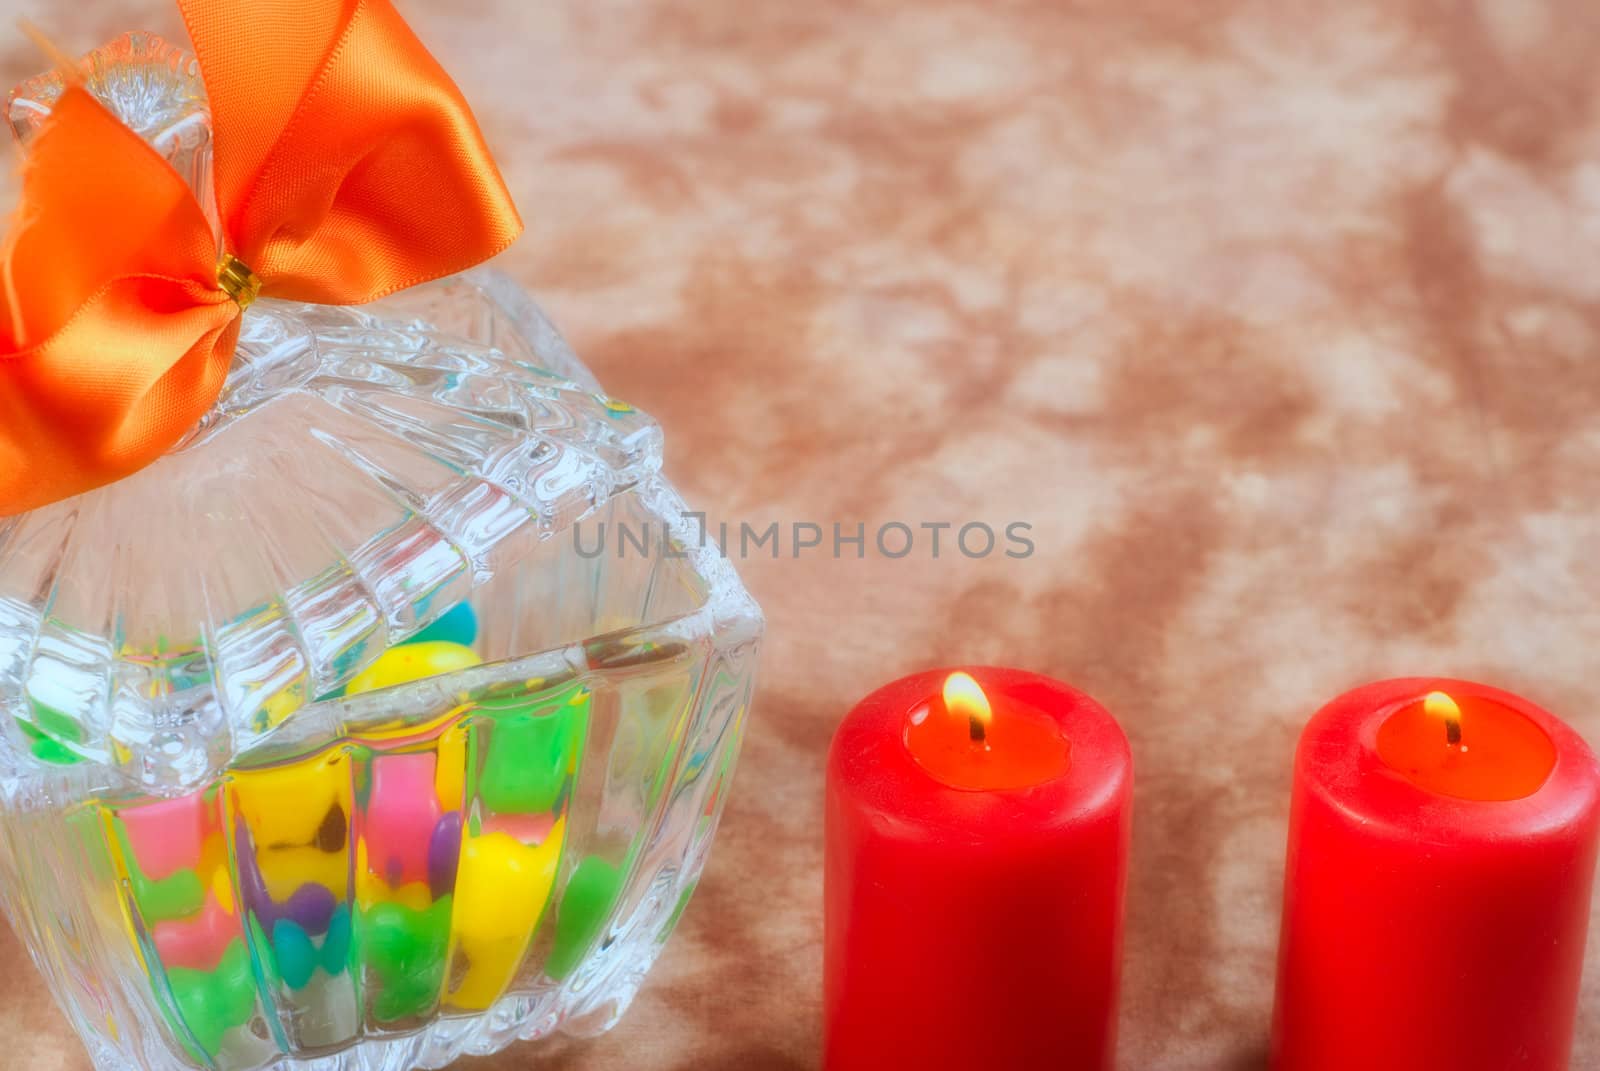 A romantic scene with a glass bowl full of candy with two lit red candles